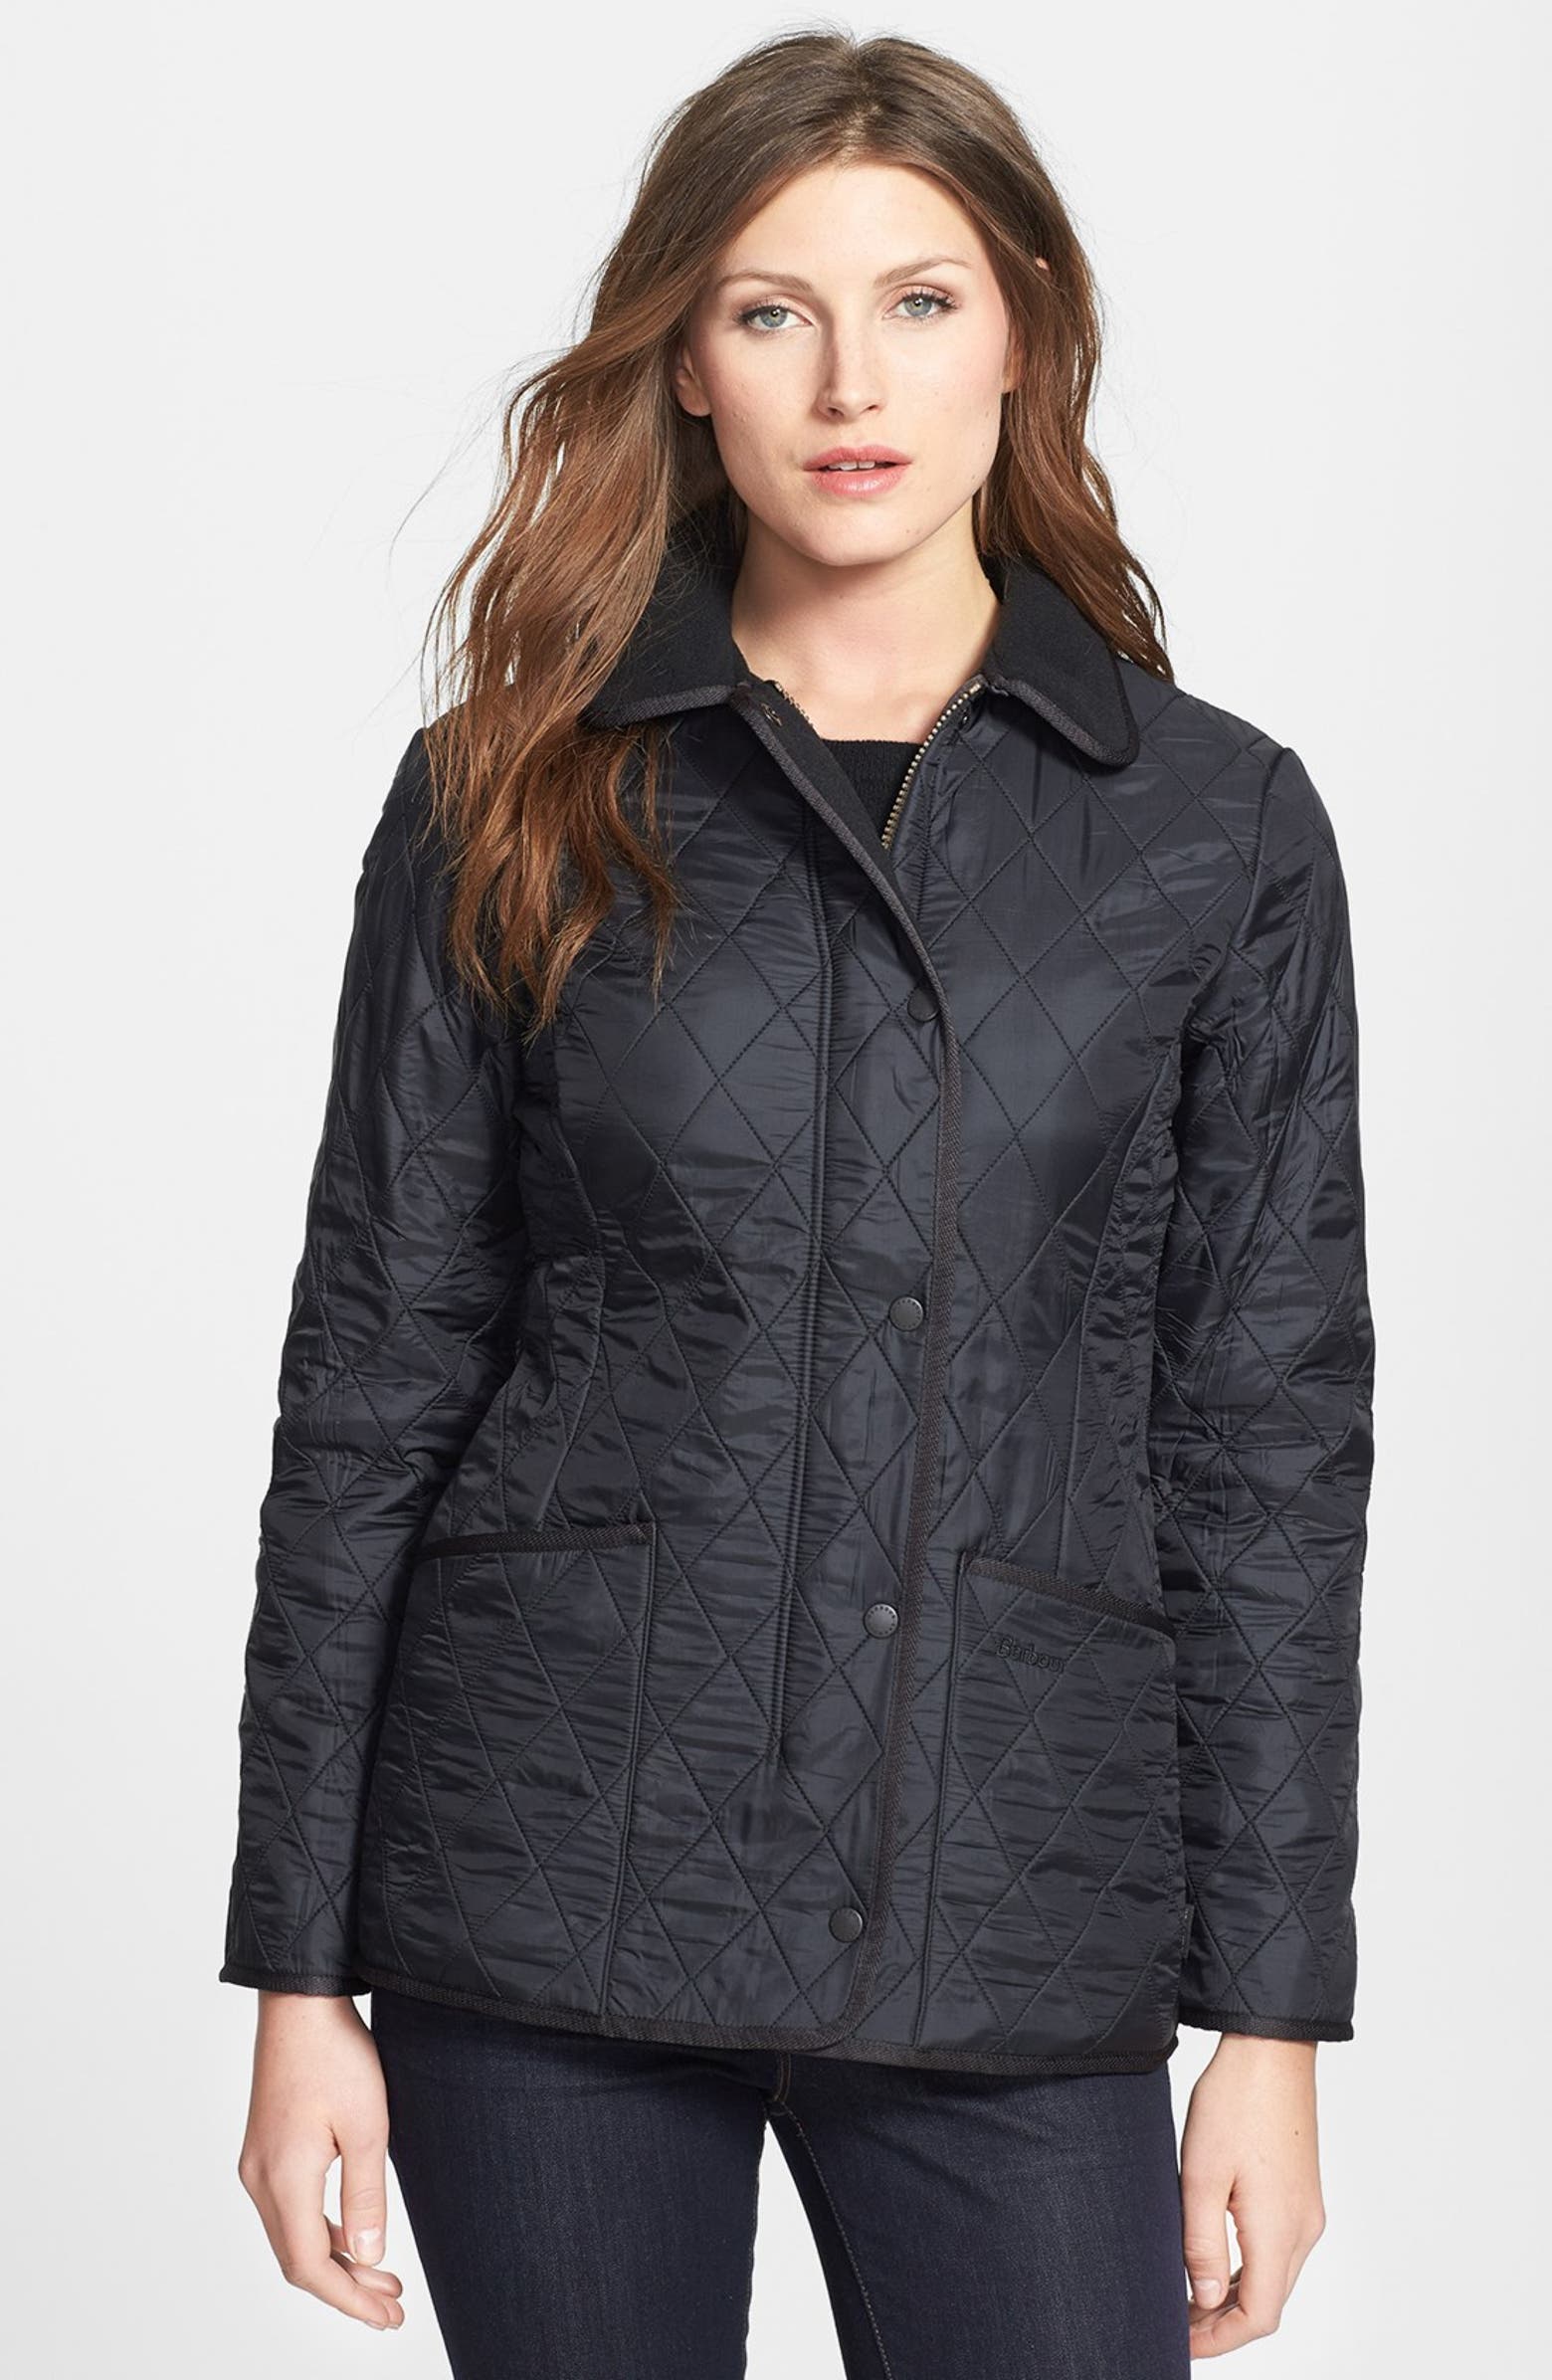 Barbour Diamond Quilted Jacket | Nordstrom